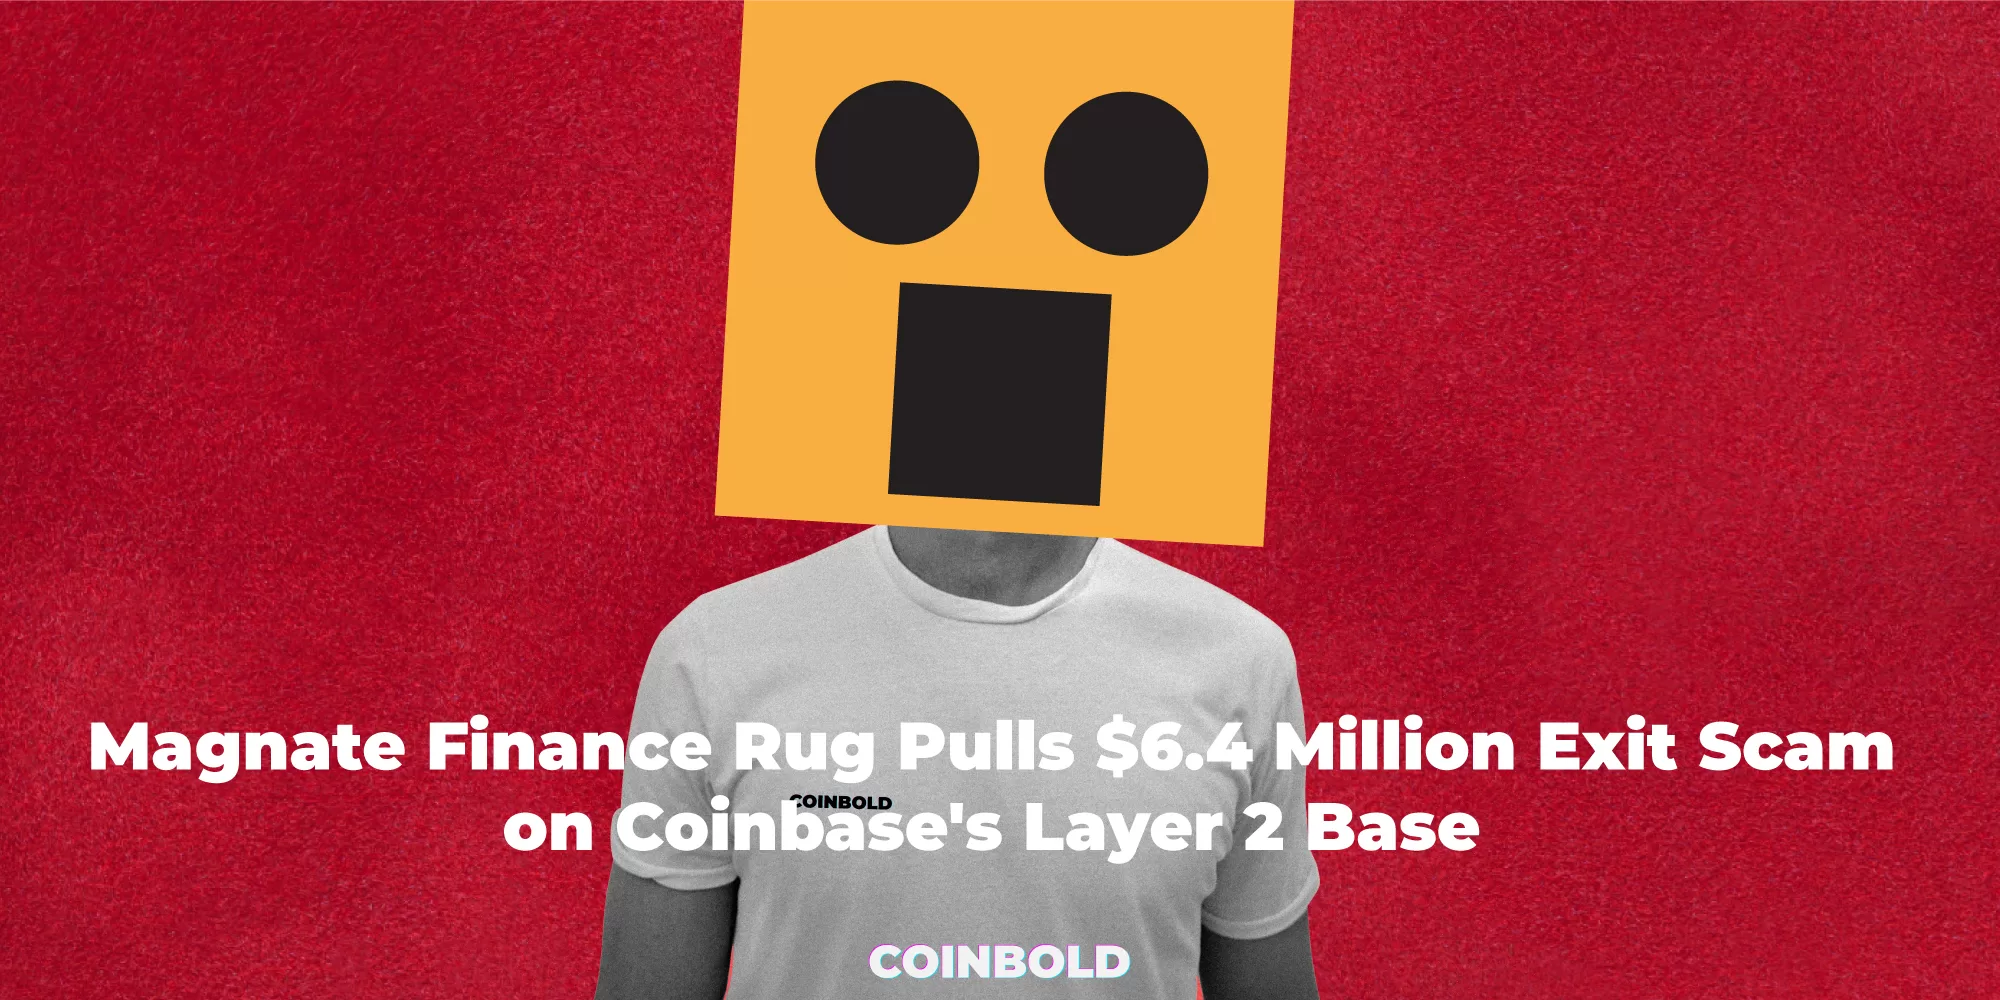 Magnate Finance Rug Pulls $6.4 Million Exit Scam on Coinbase's Layer 2 Base